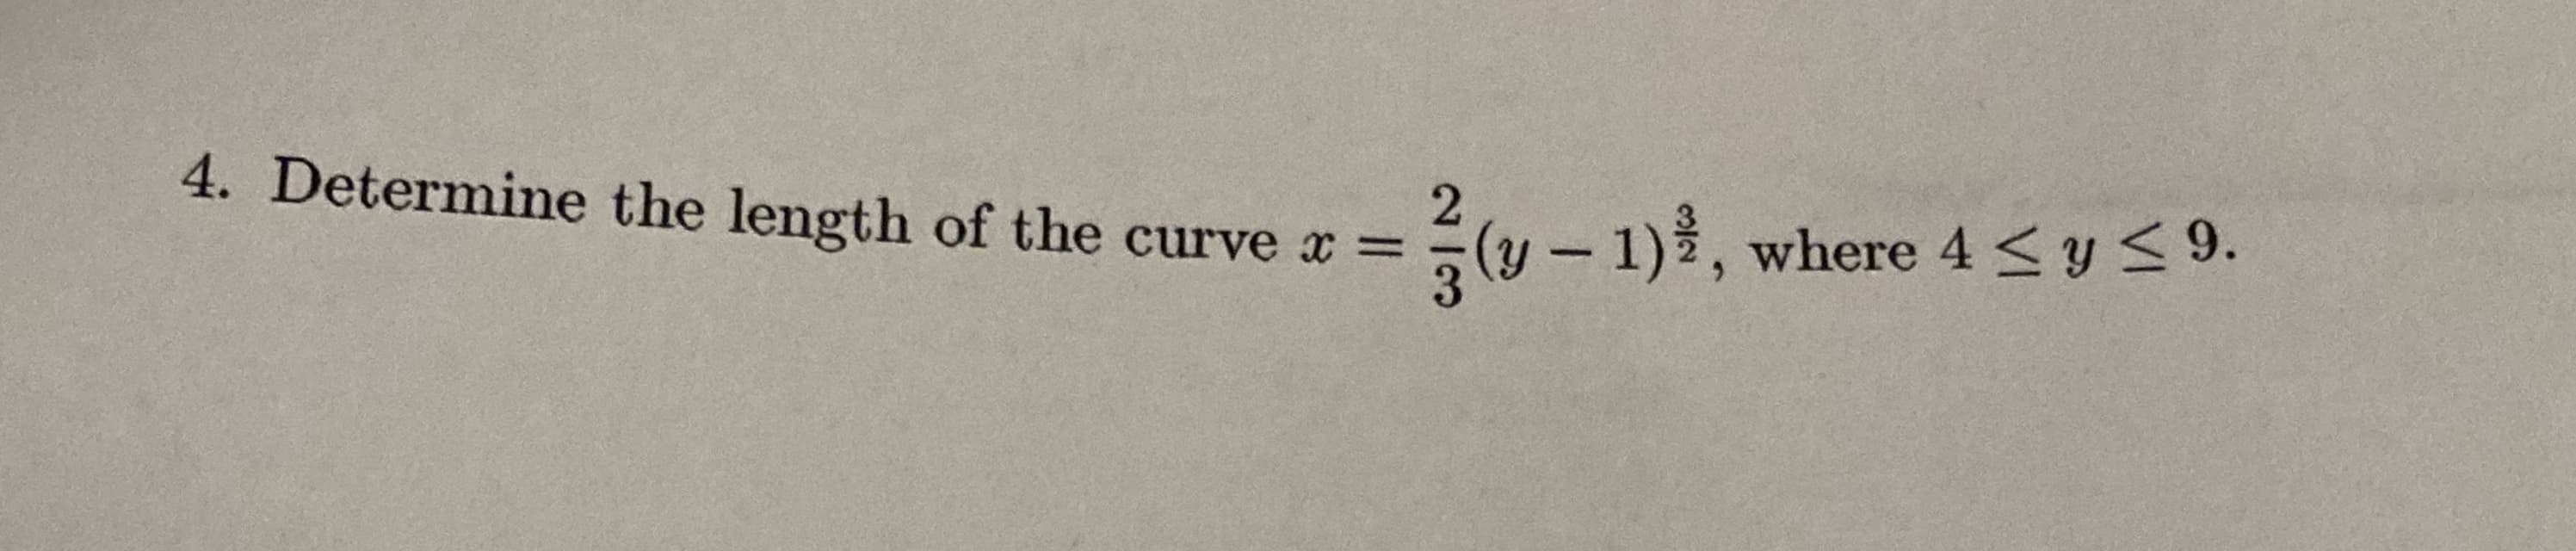 Determine the length of the curve x =
(y-1), where 4 <y <9.
